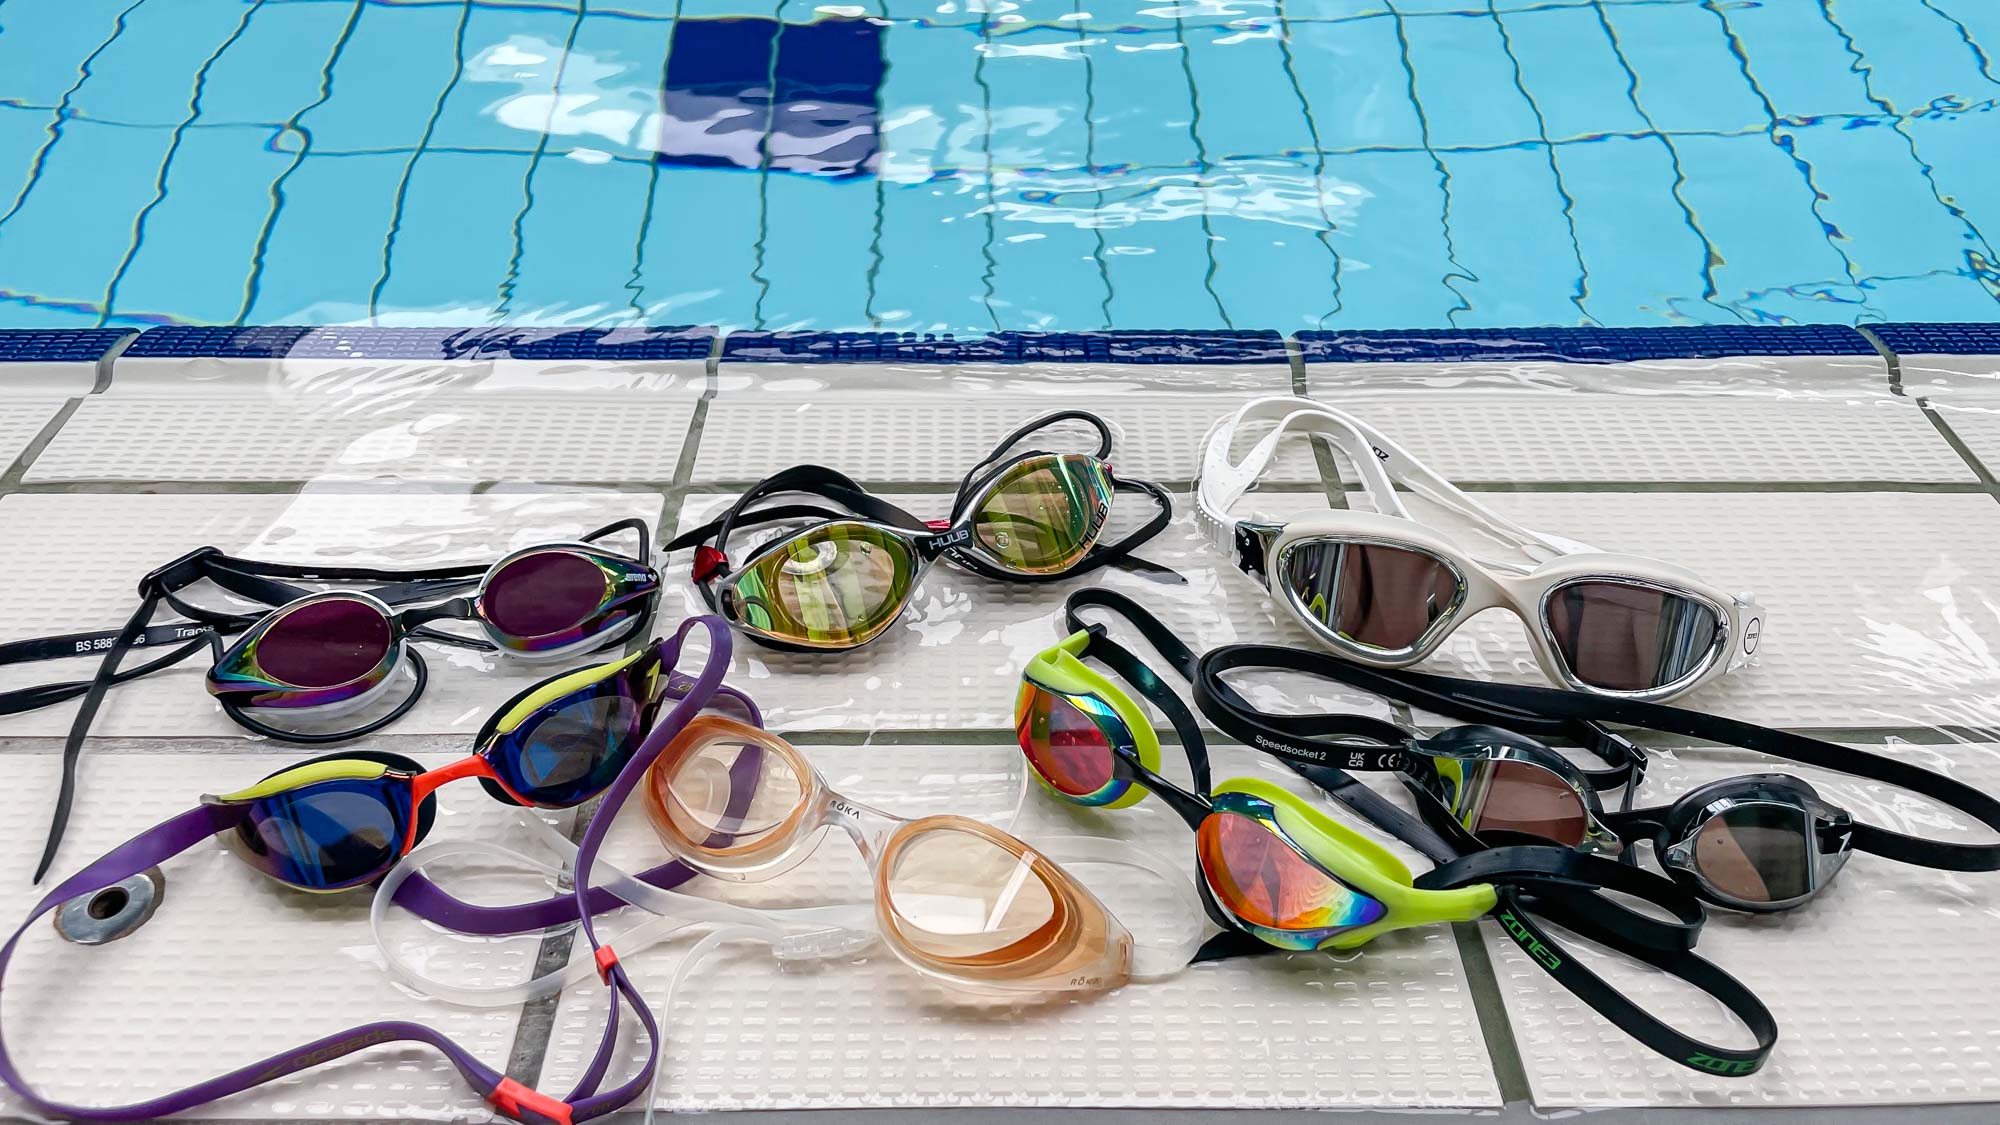 Swimming Goggles for Adults anti fog Triathlon Open Water and Swim Competitions 